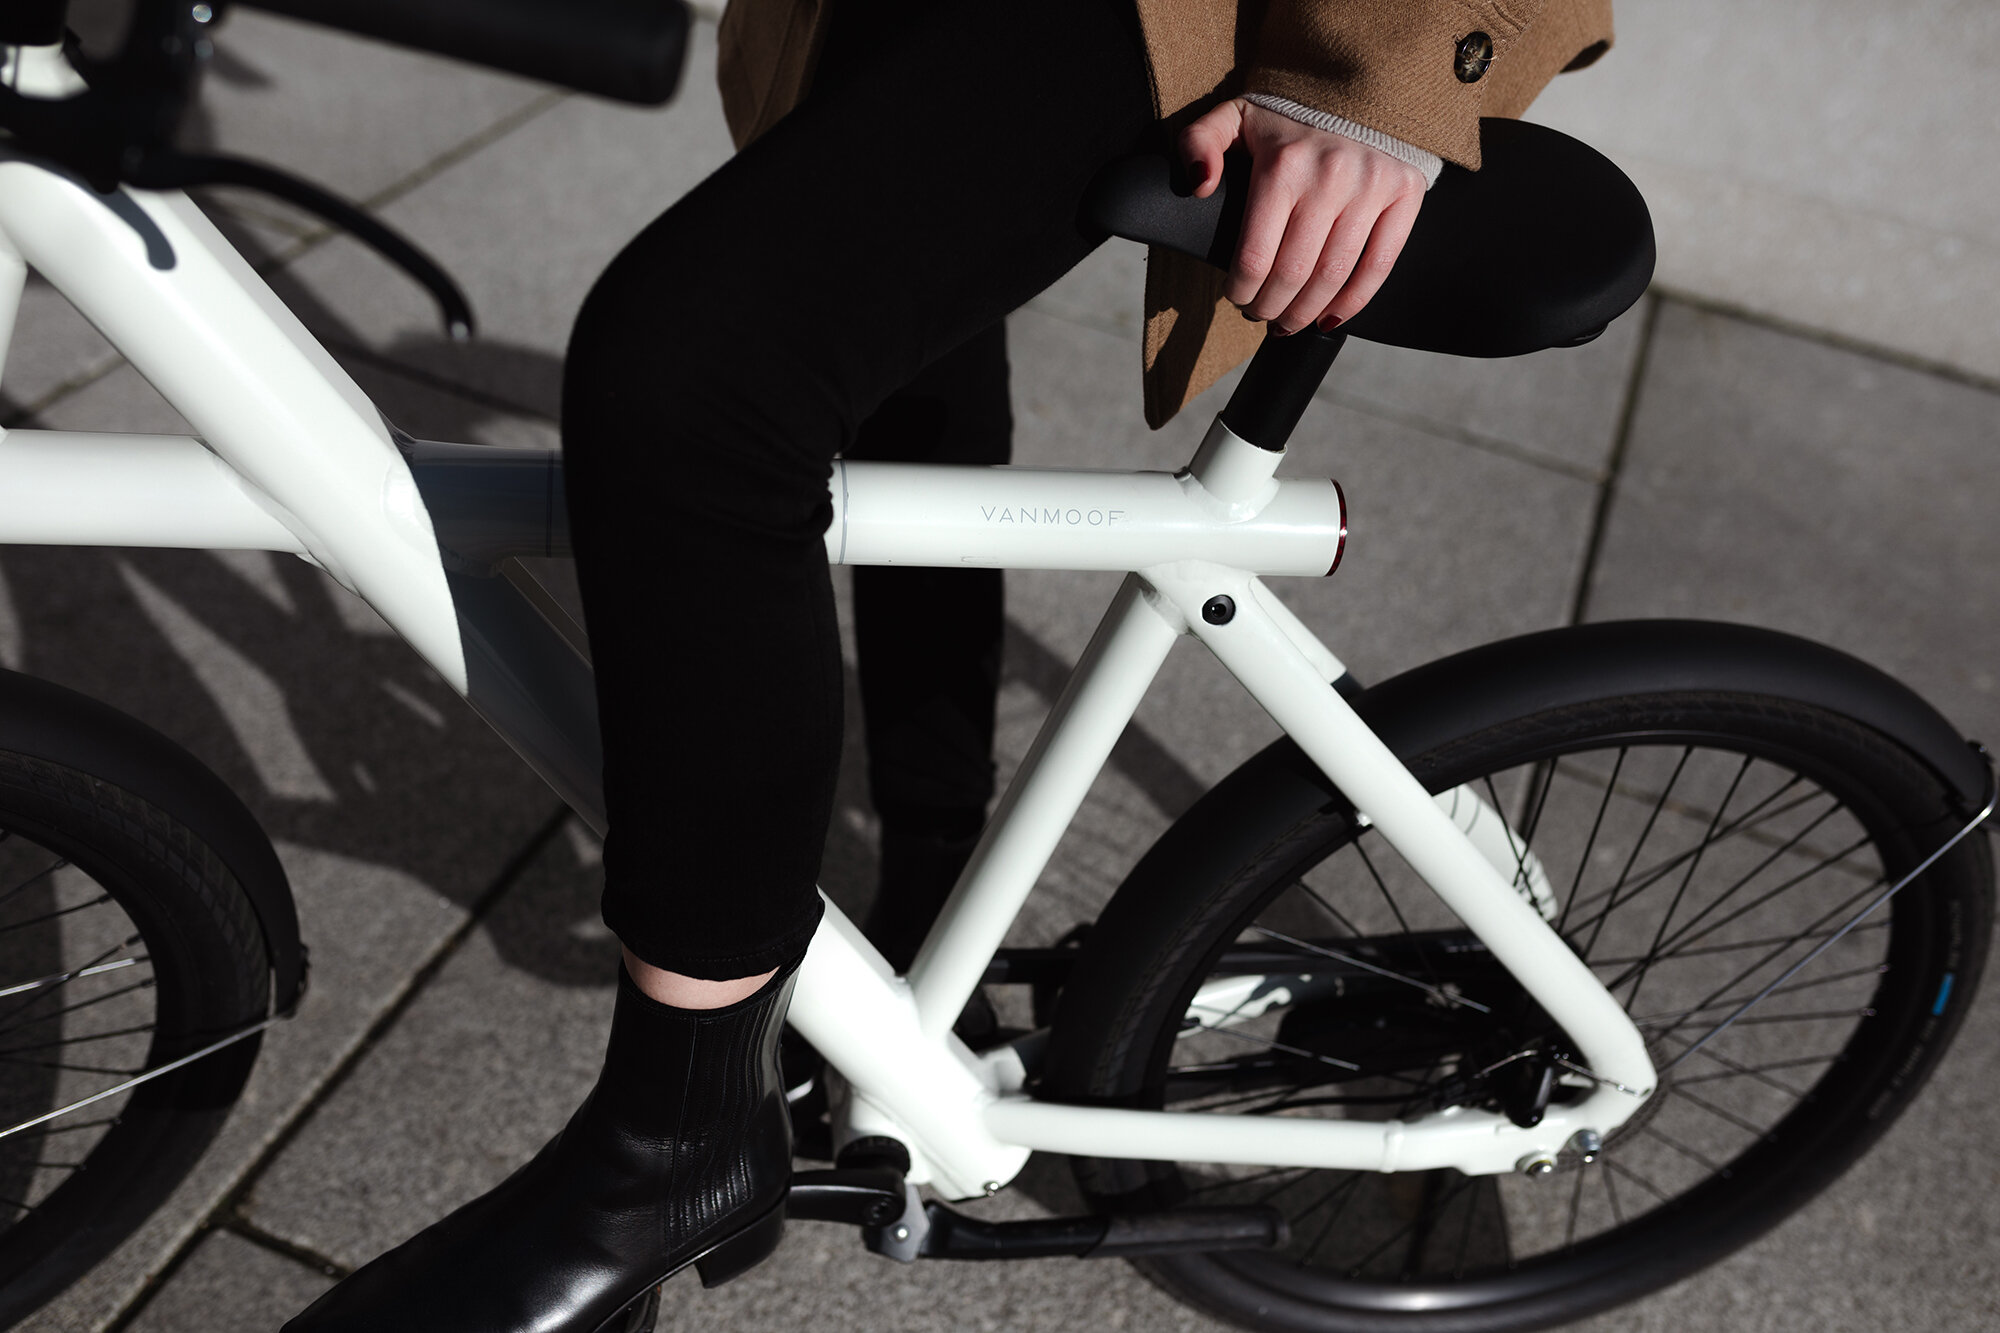 Detail of the Electrified X2 from VanMoof